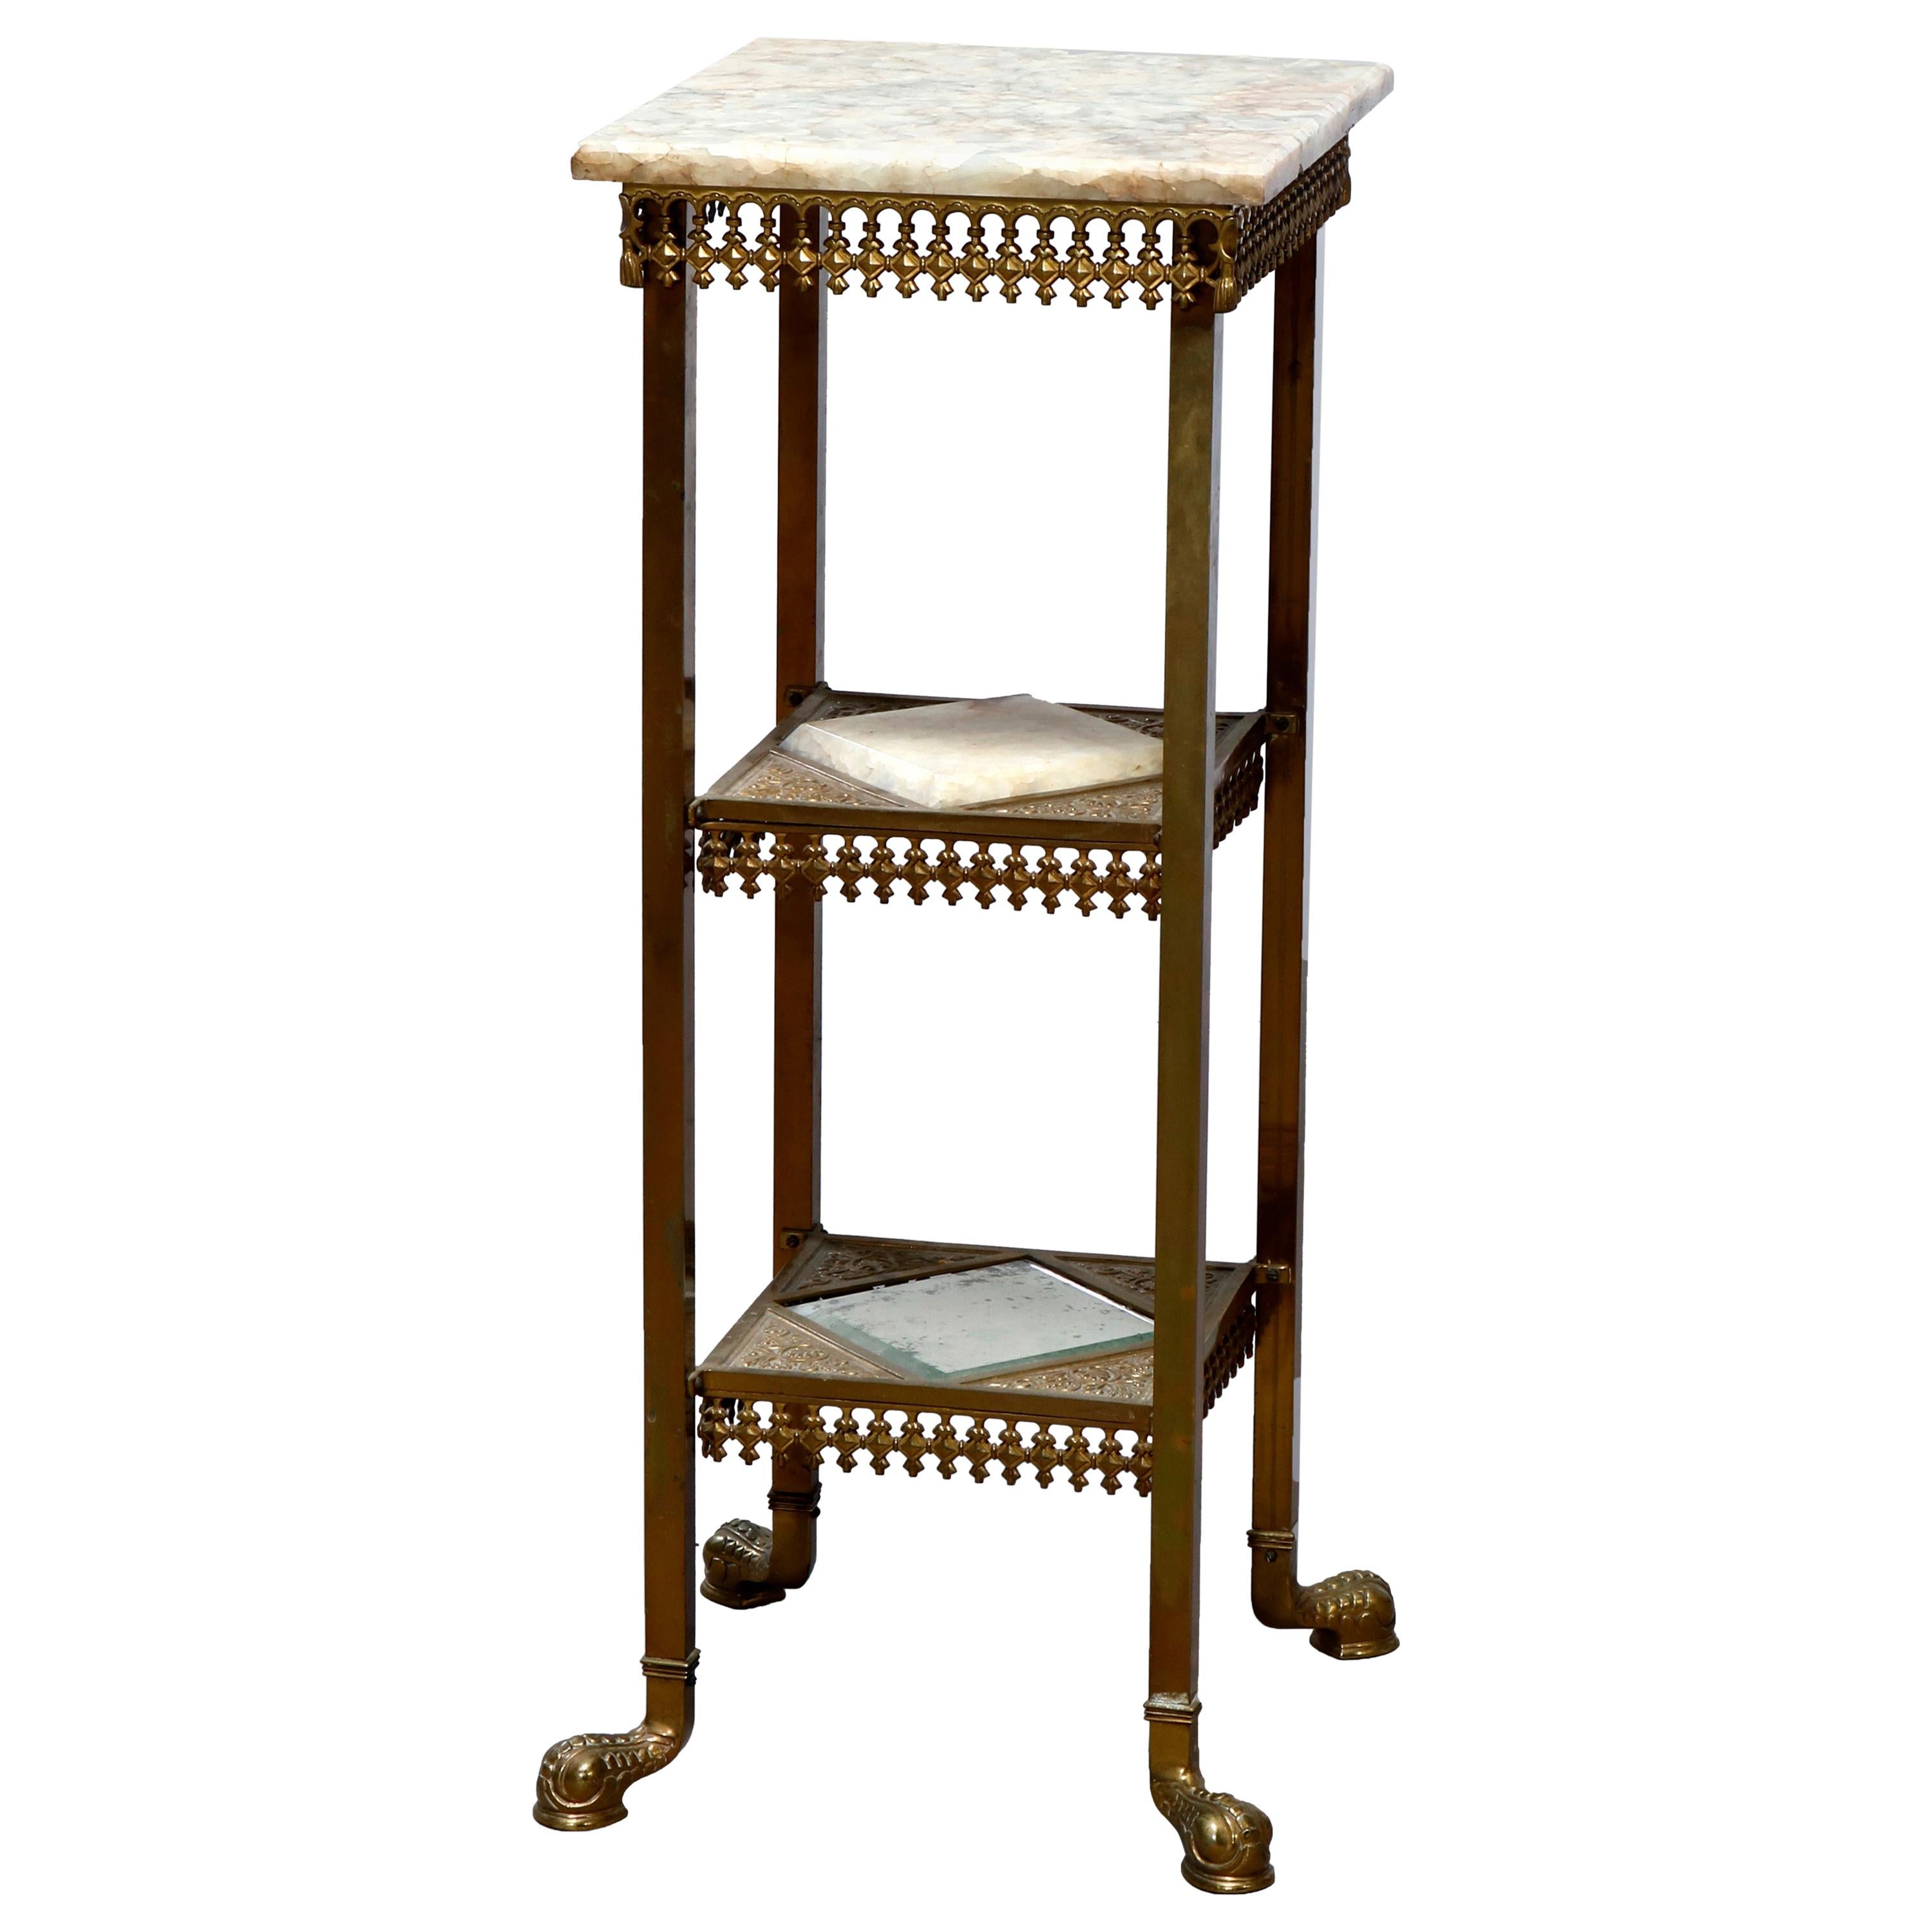 Antique Aesthetic Movement Brass & Onyx Three Tiered Plant Stand, Circa 1870